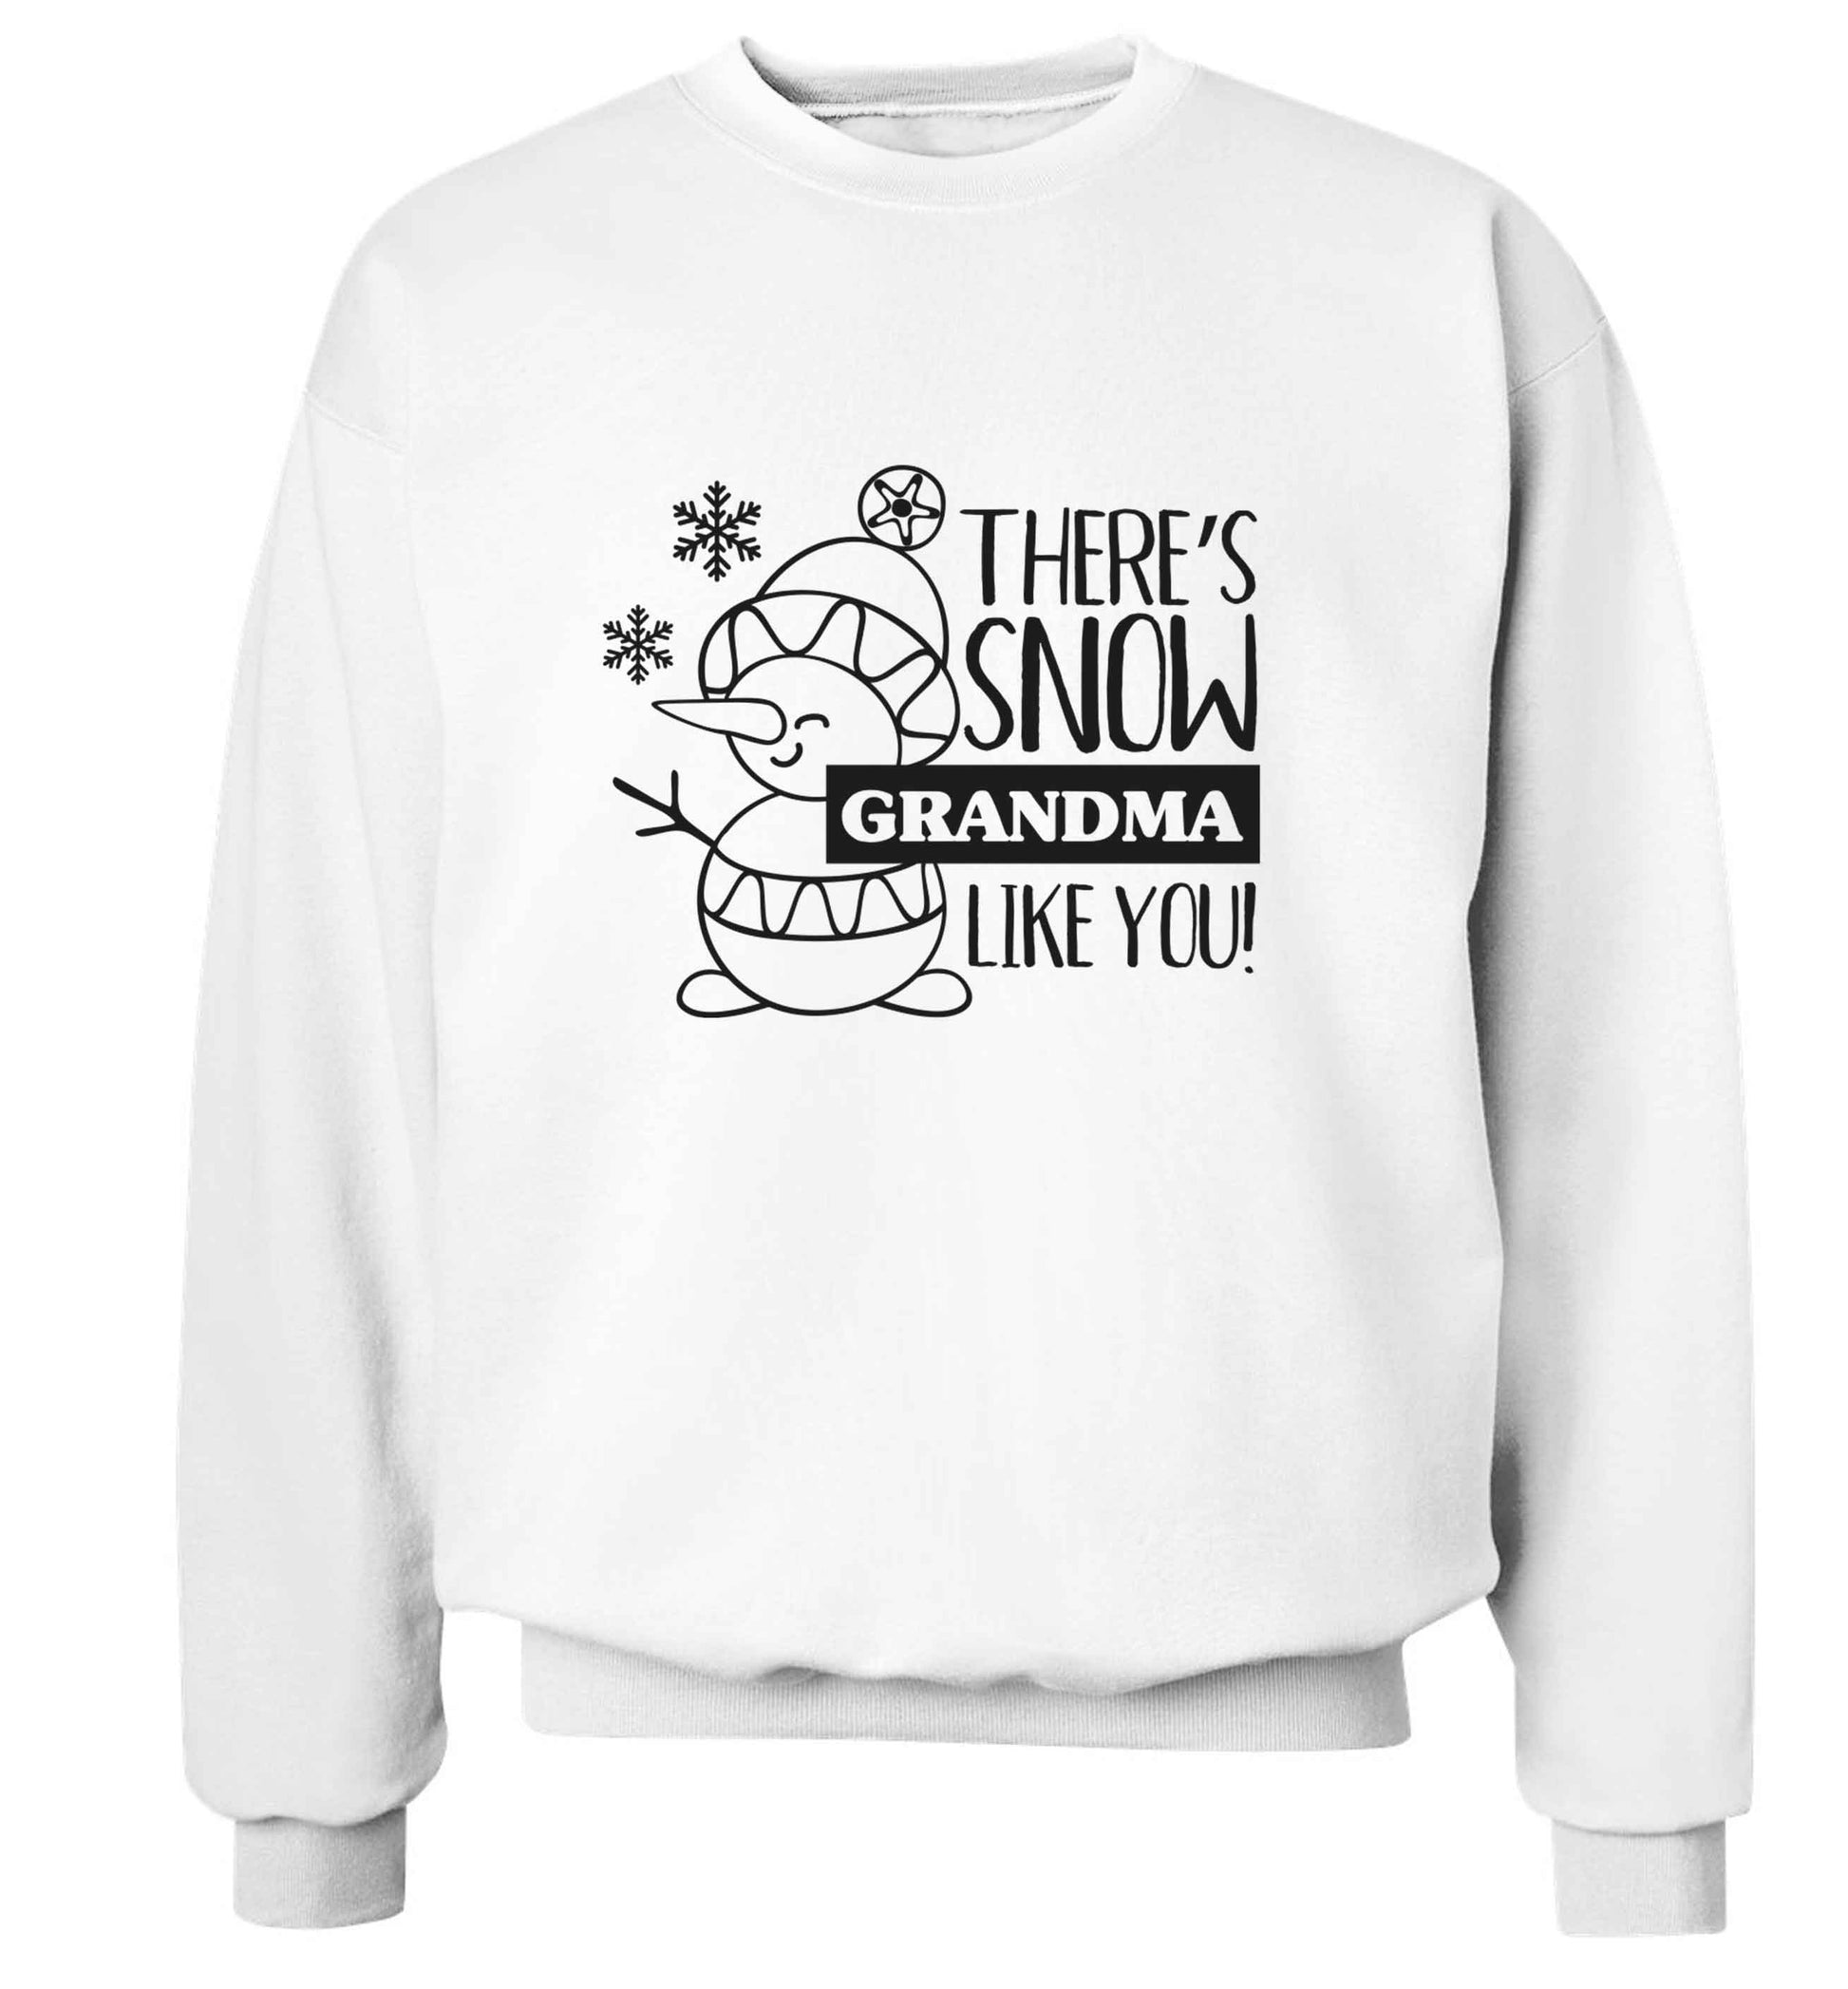 There's snow grandma like you adult's unisex white sweater 2XL